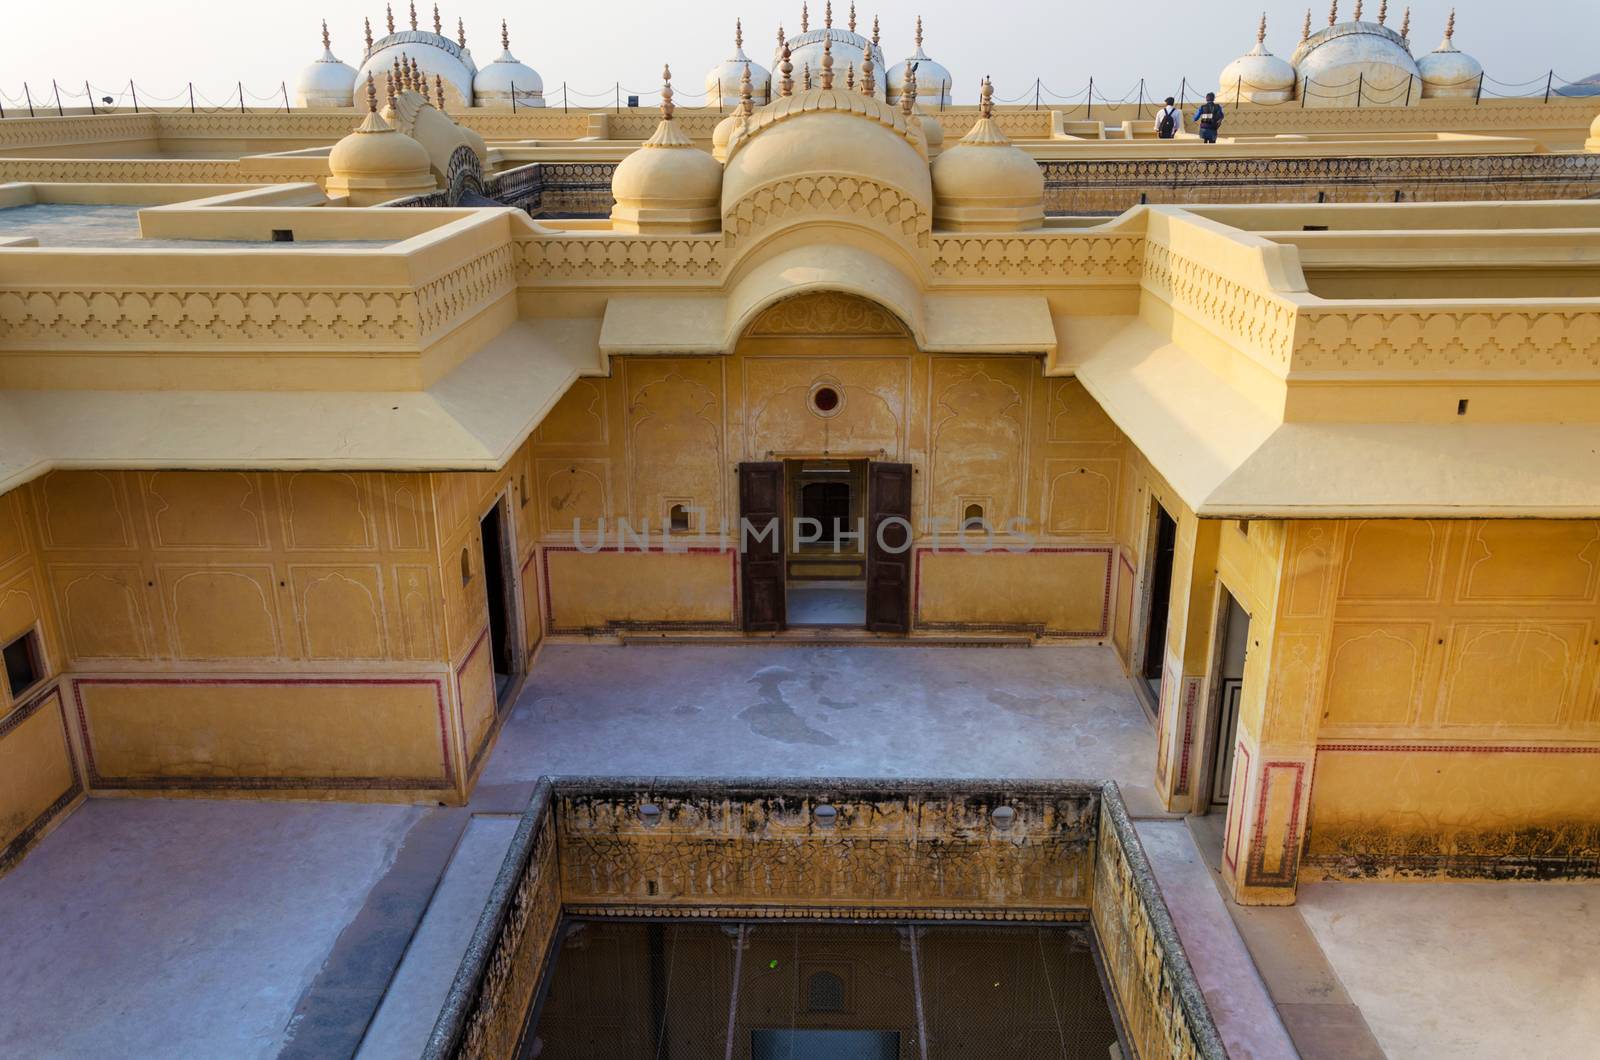 Courtyard inside an old Indian palace. Nahargarh Fort, Jaipur, Rajasthan, India